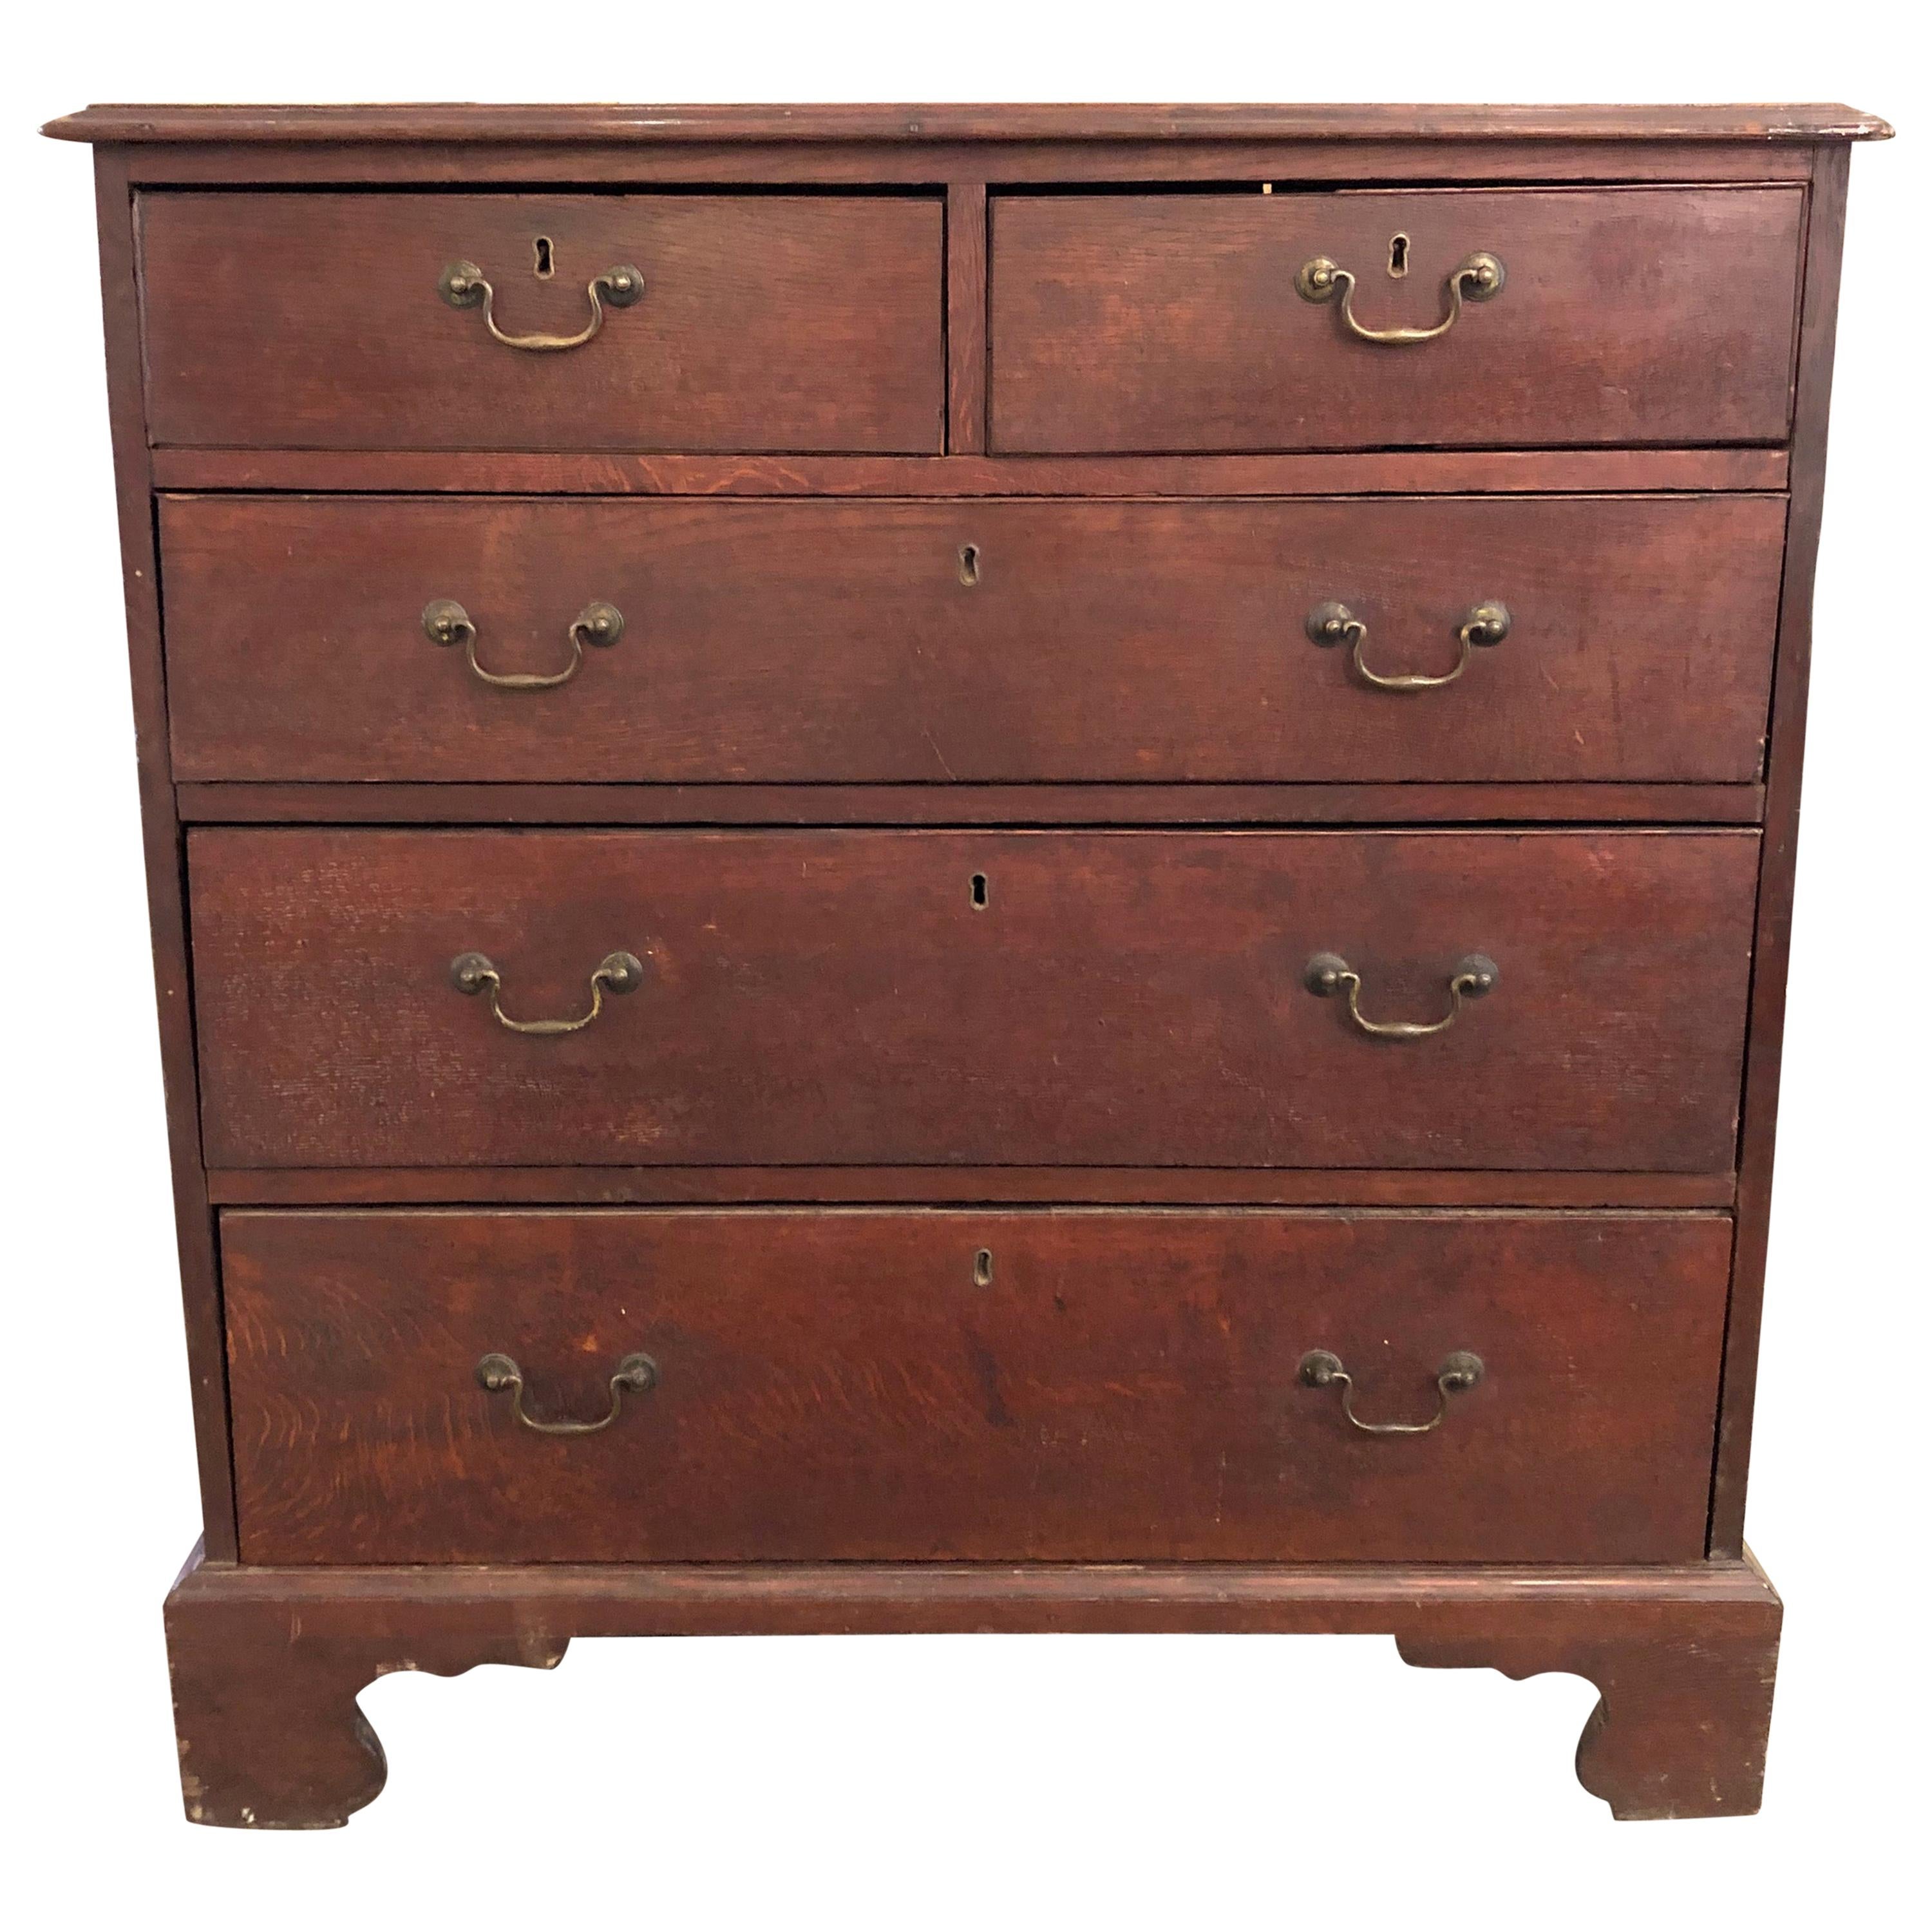 18th Century English Oak Tall Chest of Drawers